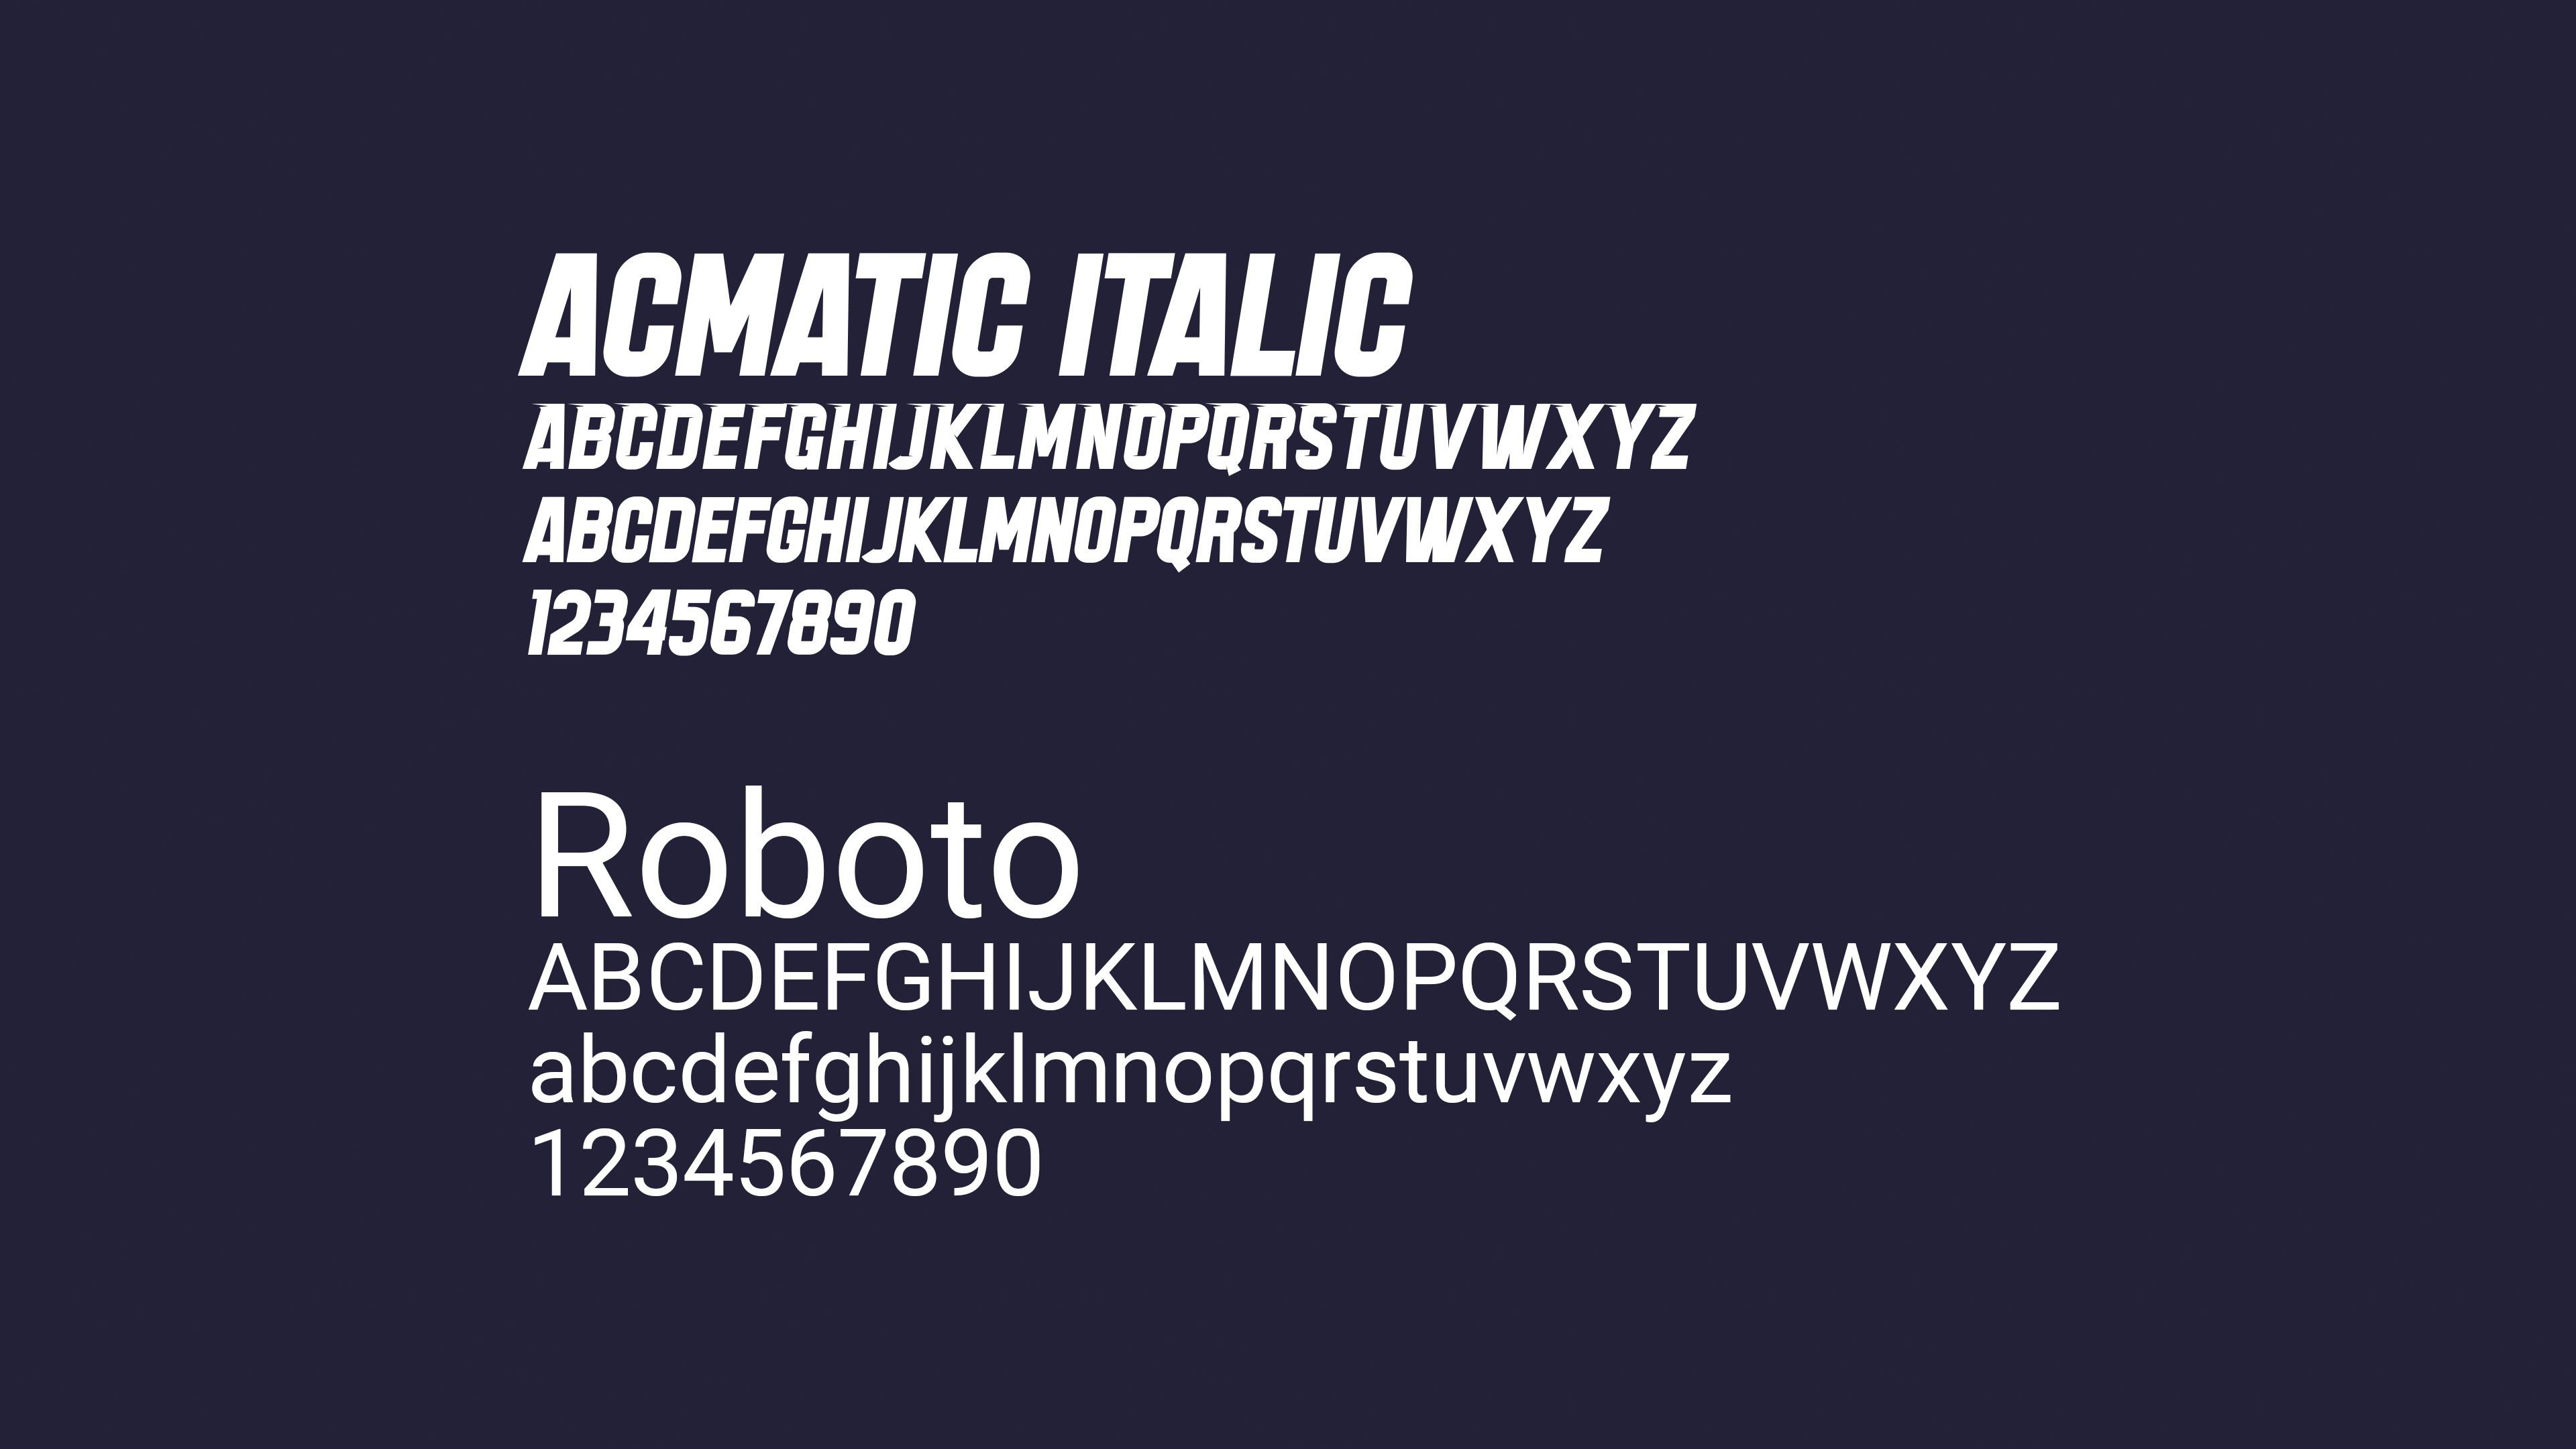 Fonts used for Sonic Bunny Brand: Acmatic Italic and Roboto